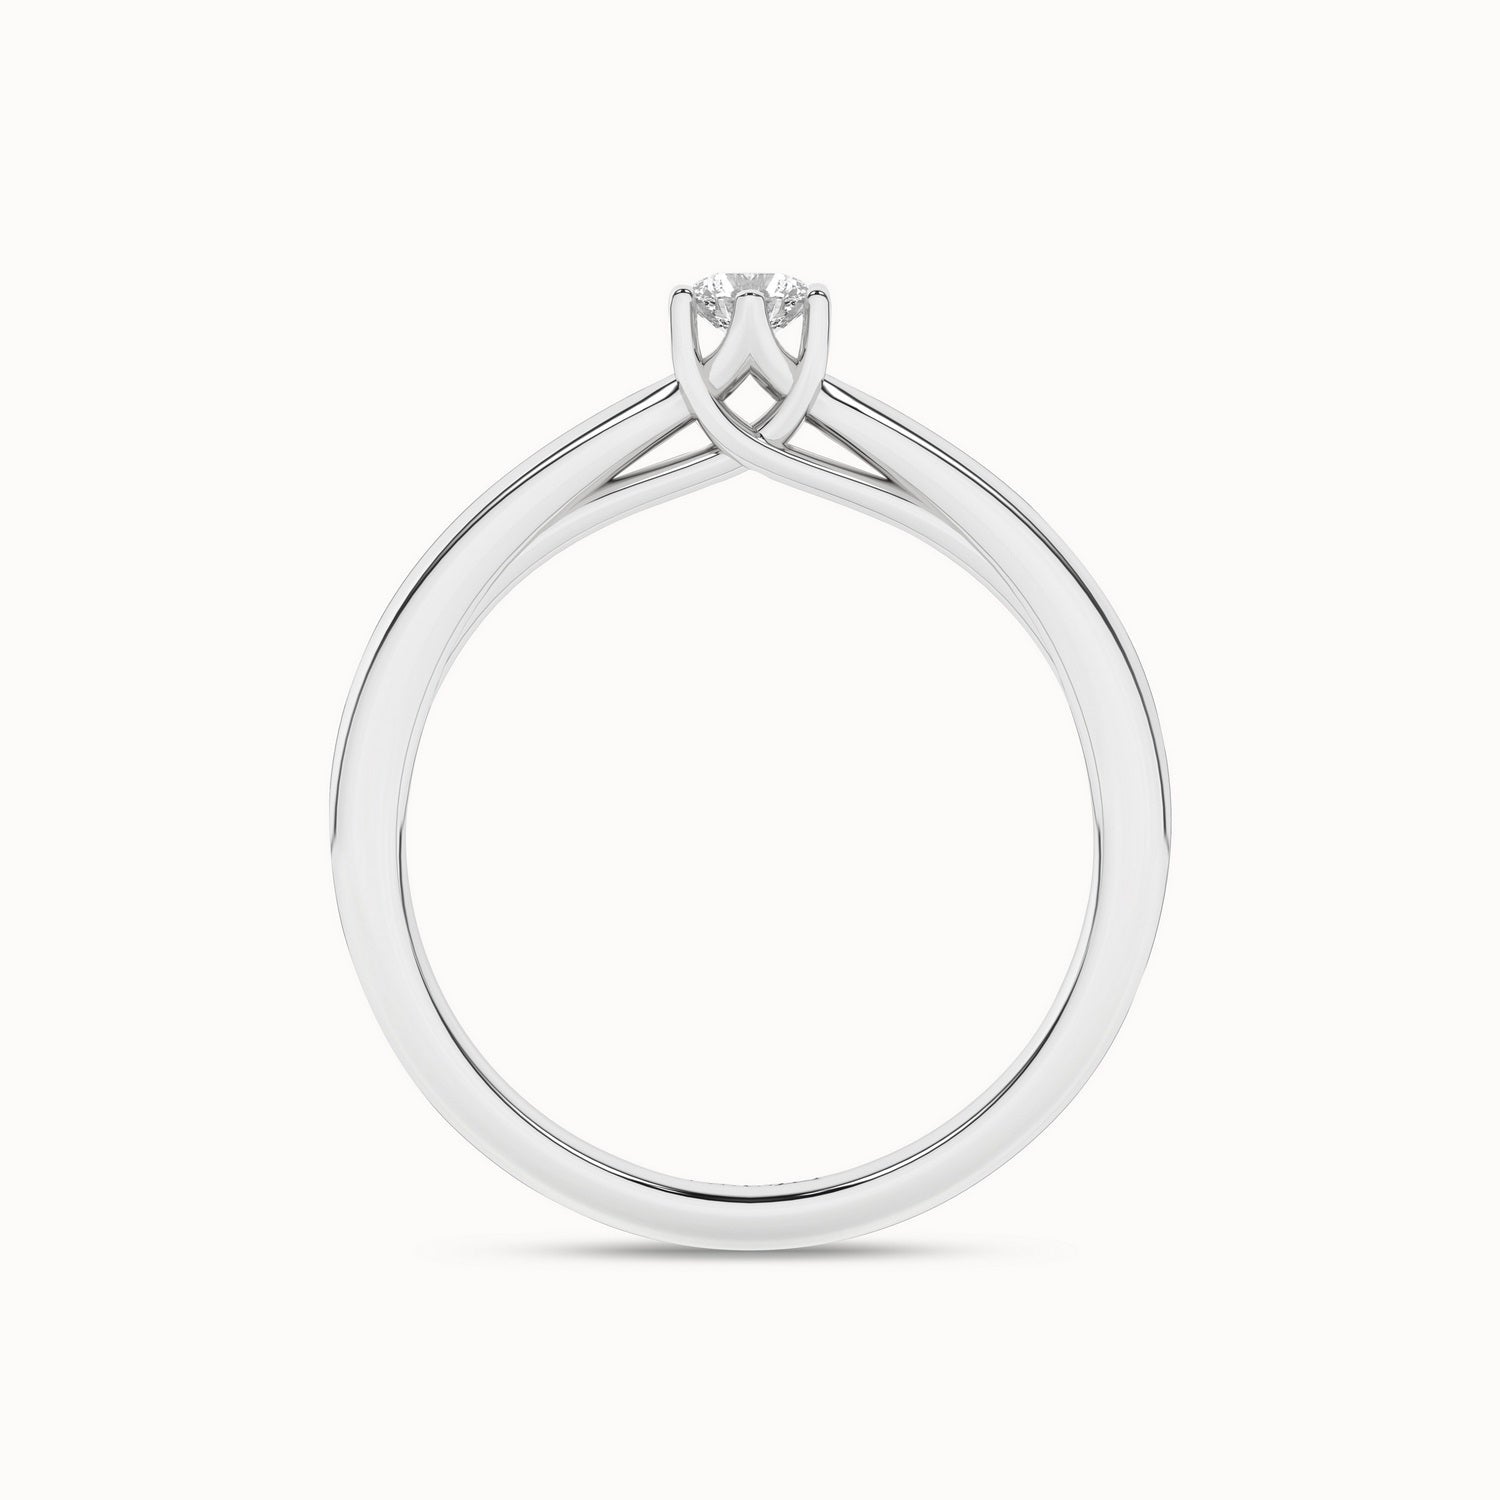 6-Pronged Round Ring_Product Angle_1/6Ct - 2